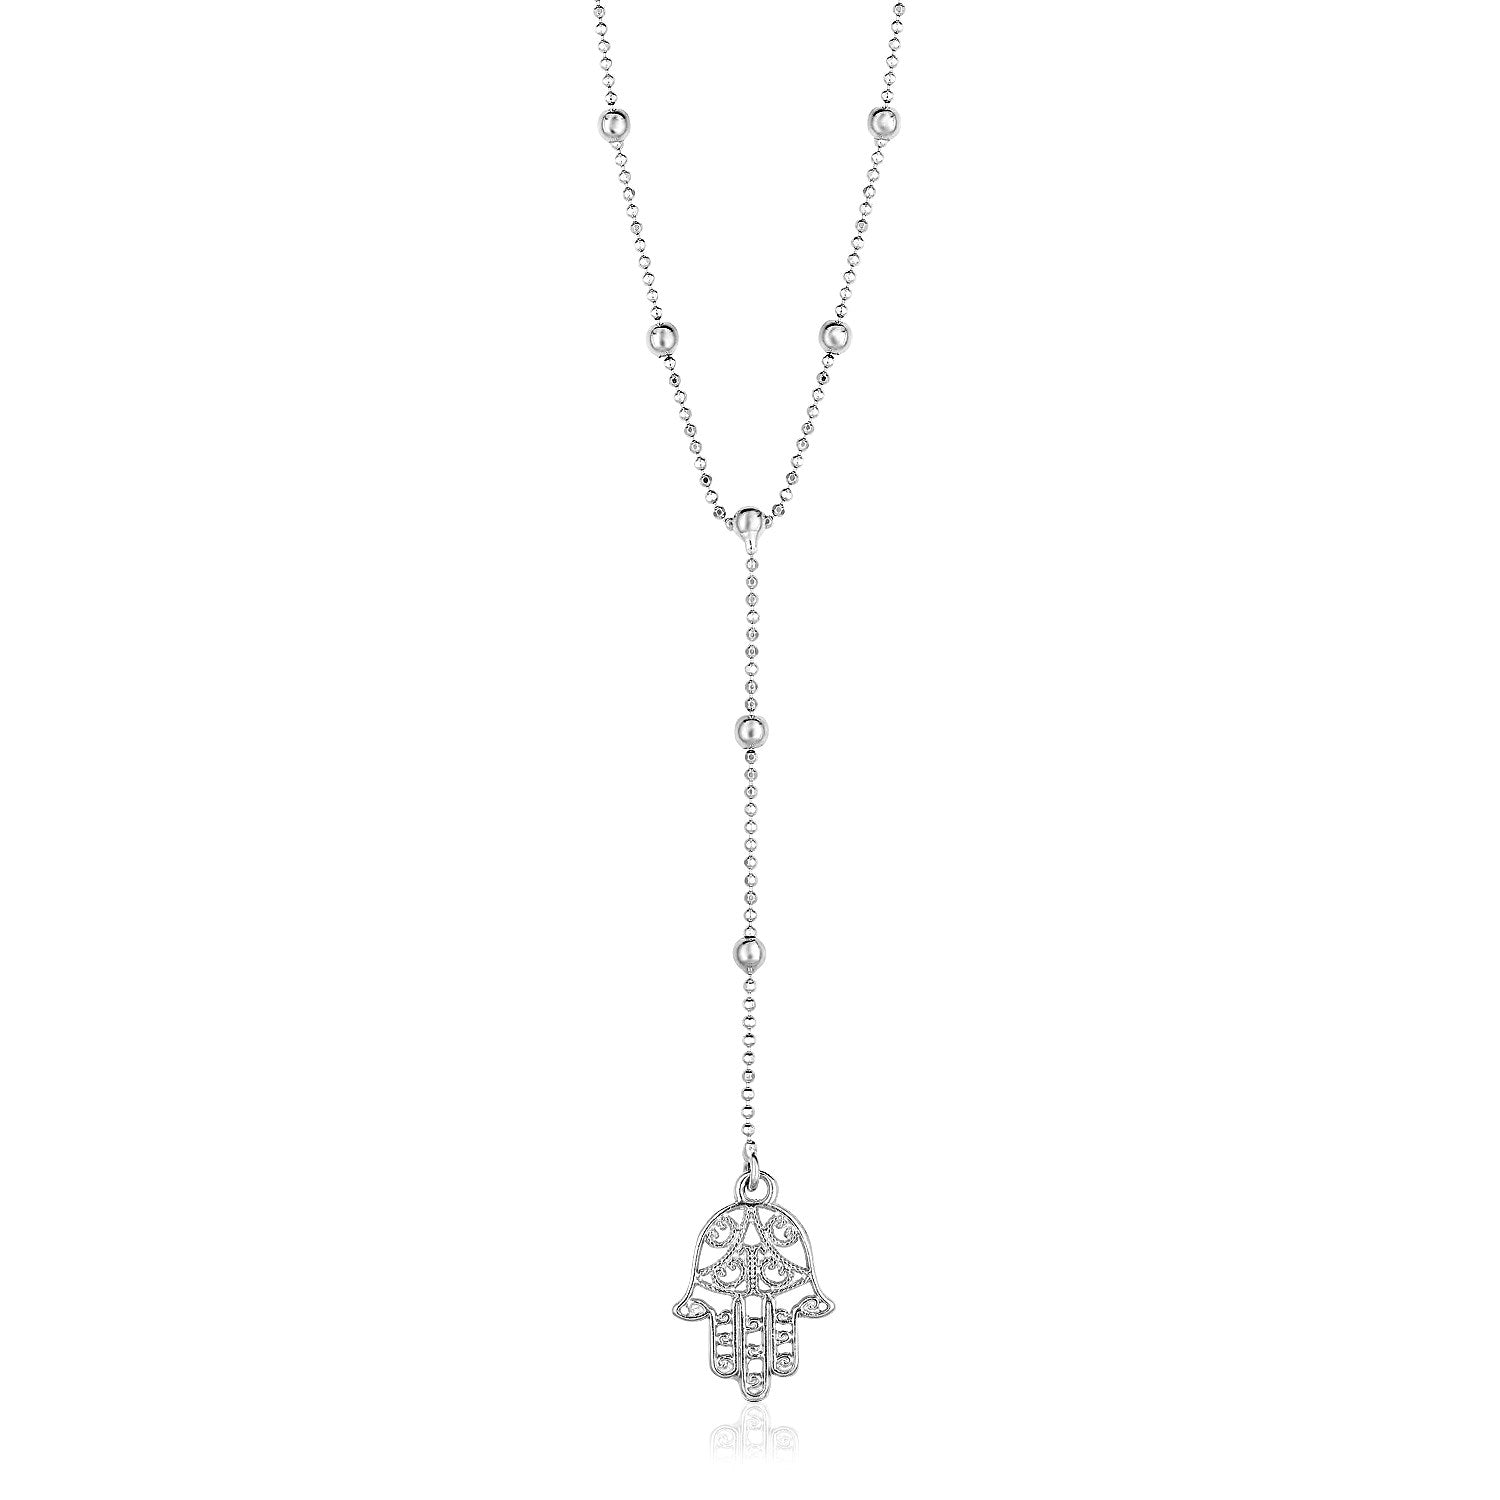 Sterling Silver Lariat Necklace with Hand of Hamsa Symbol